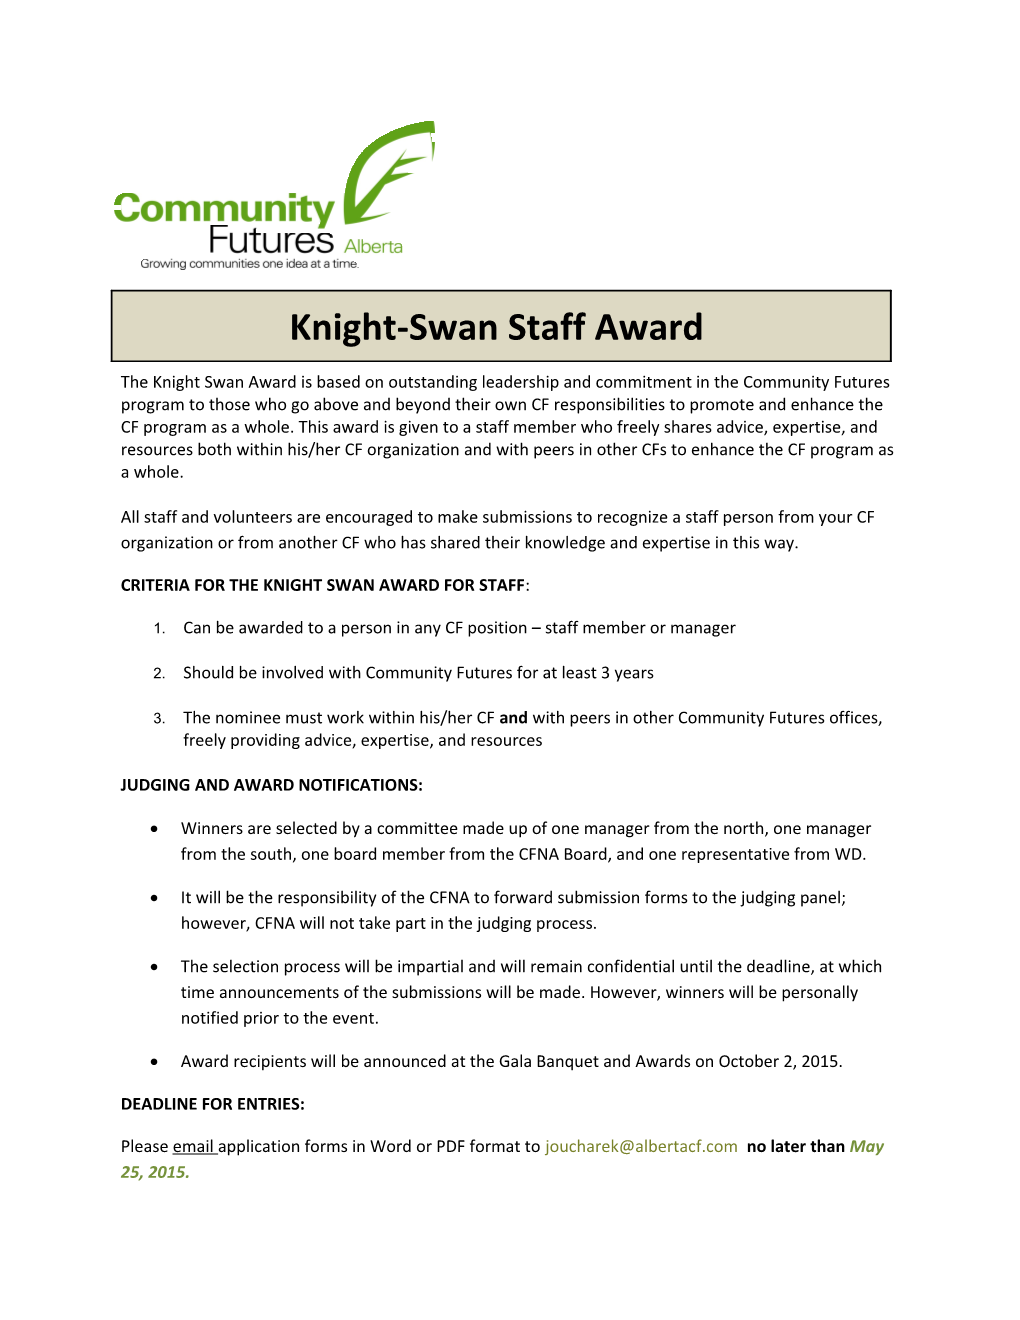 Criteria for the Knight Swan Award for Staff